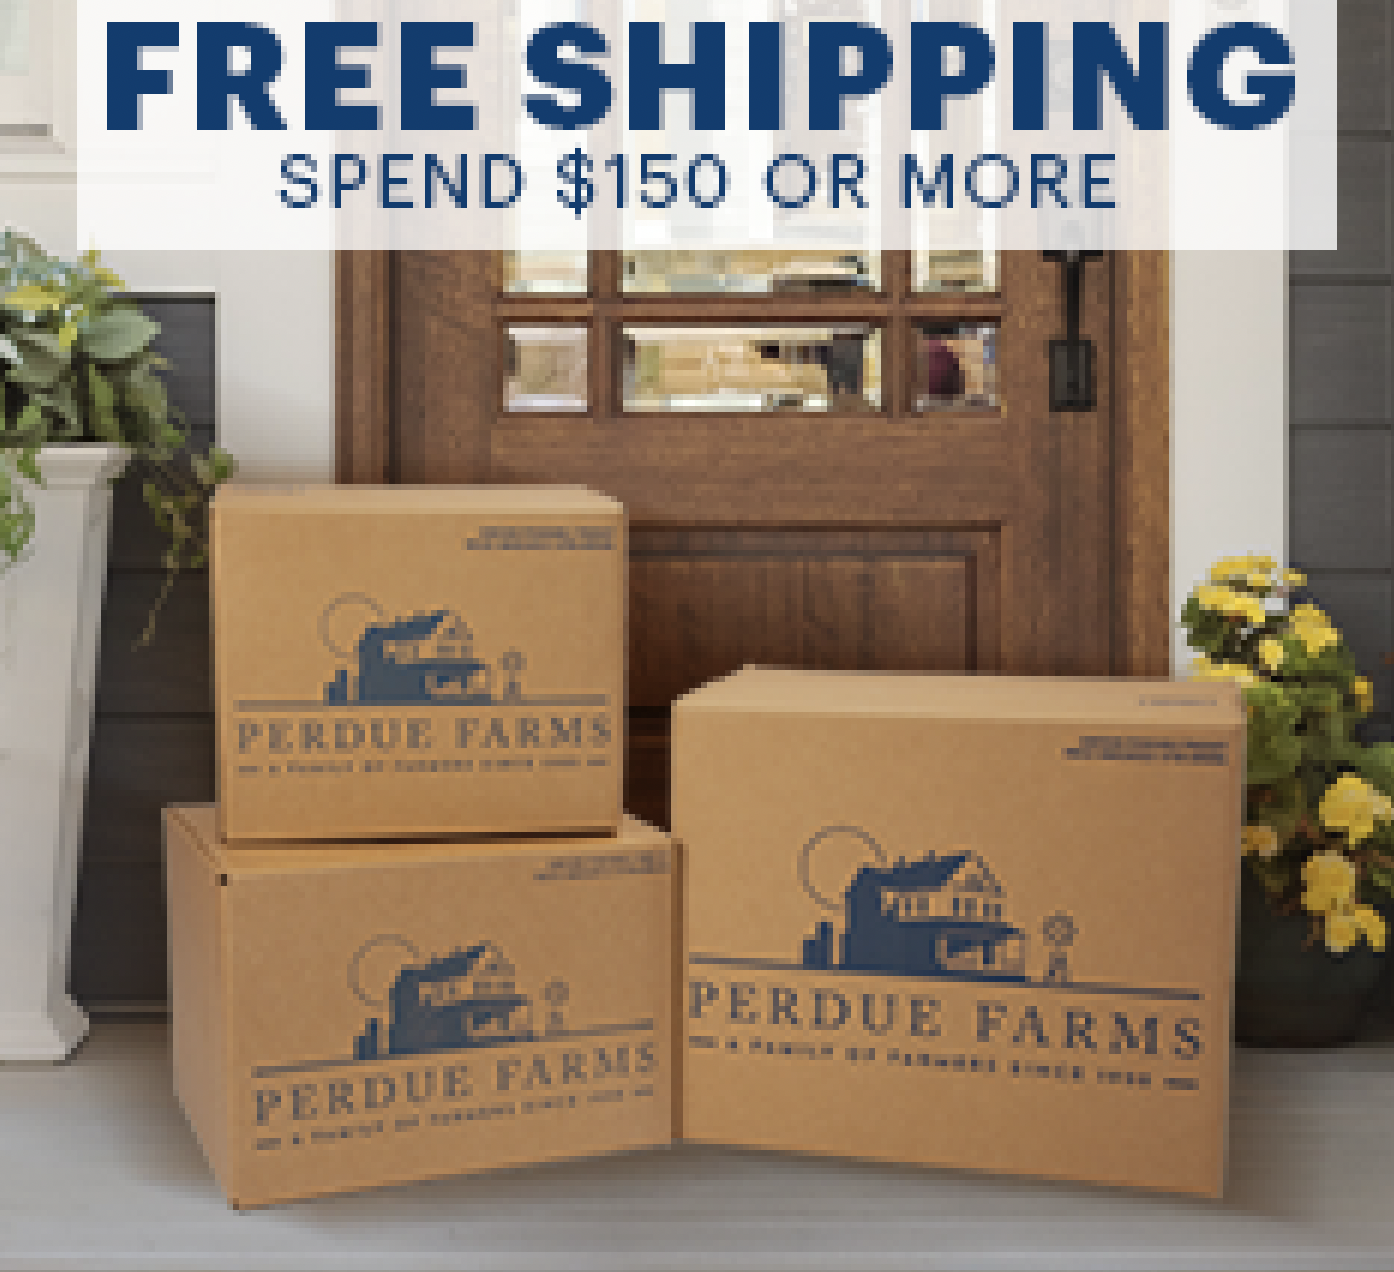 Perdue Farms - Free shipping $150 or more